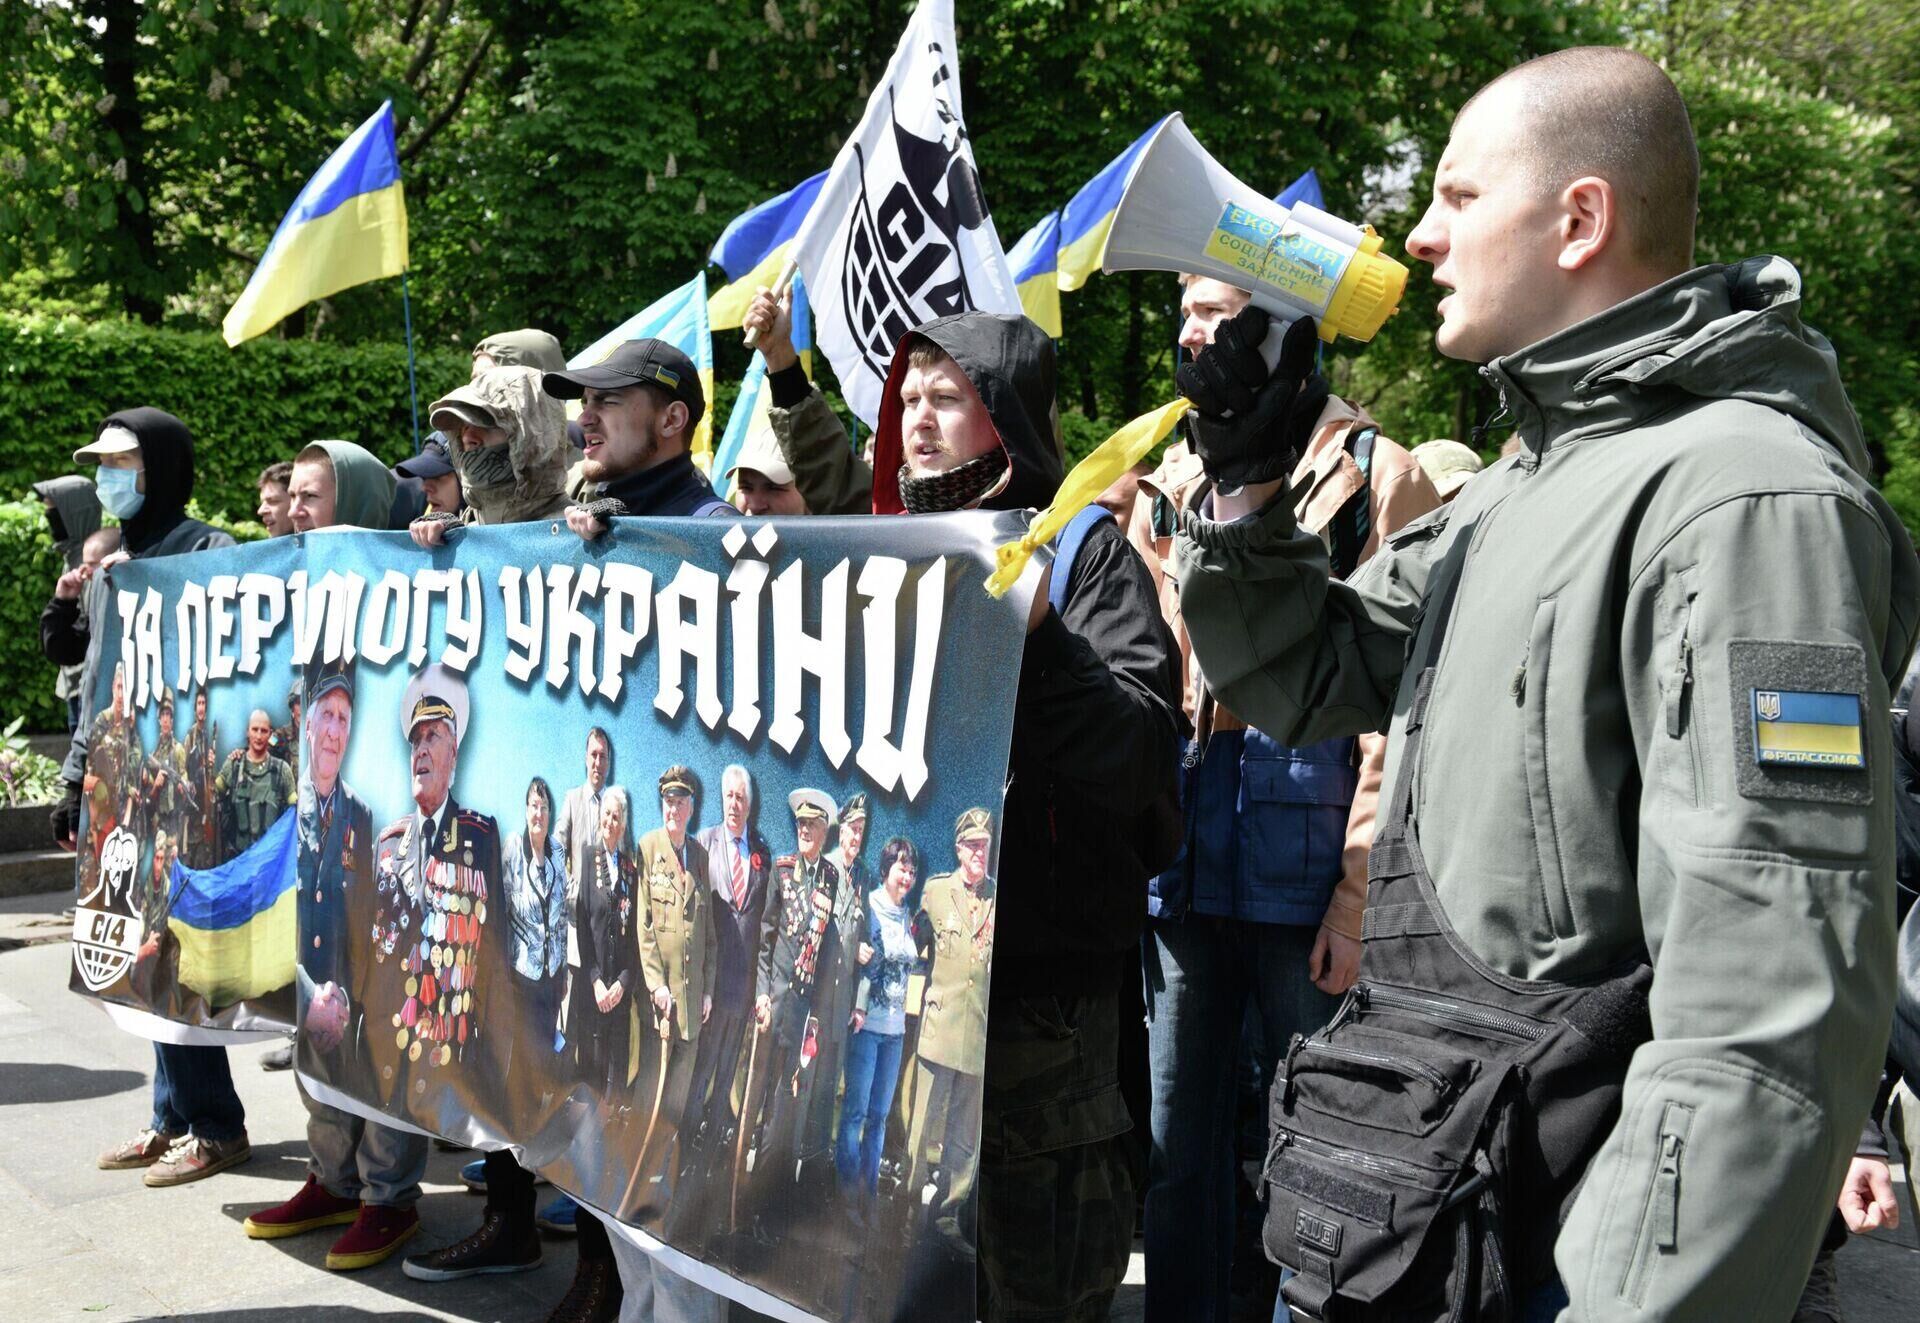 Members of the Ukrainian Nationalist Group S14 (an organisation banned in Russia) marching against “The Immortal Regiment” rally in Kiev. - Sputnik International, 1920, 14.05.2022